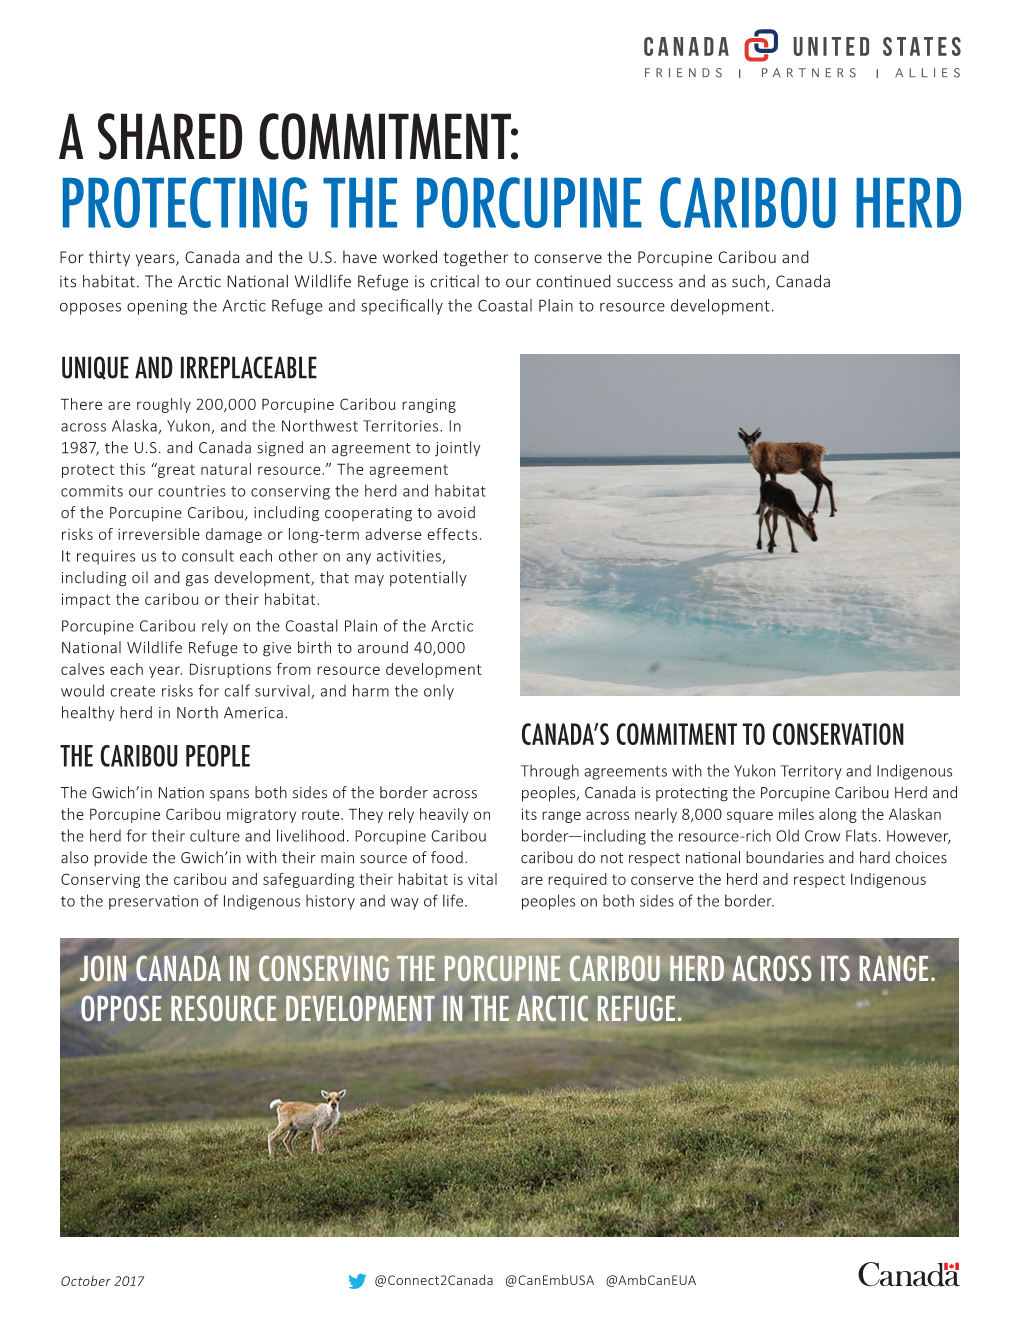 PROTECTING the PORCUPINE CARIBOU HERD for Thirty Years, Canada and the U.S